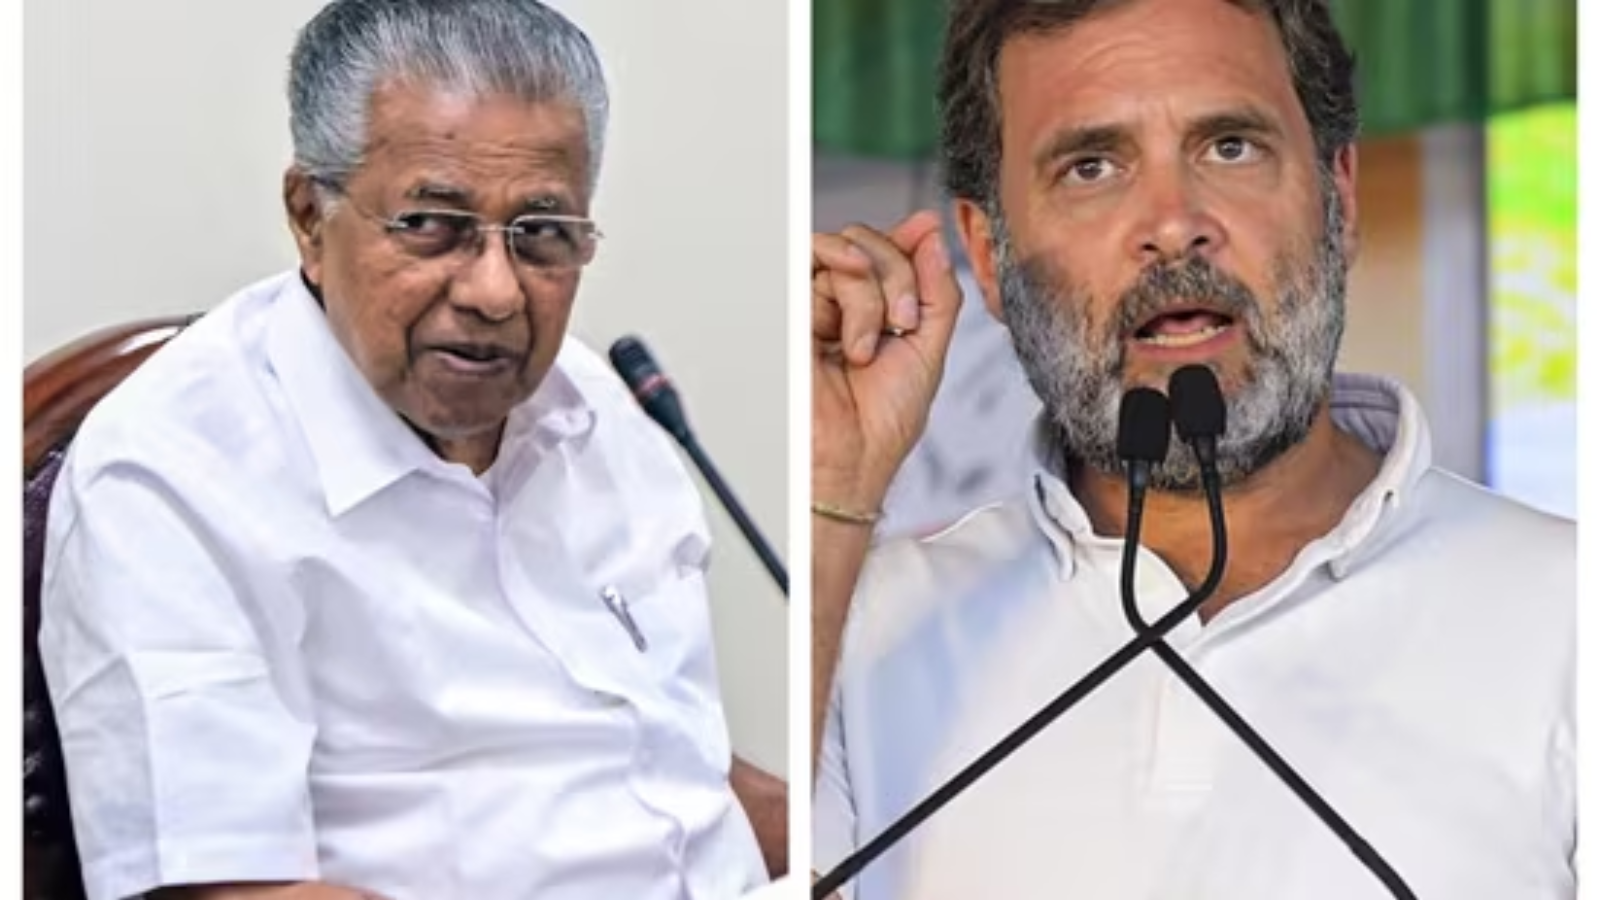 Kerala CM Vijayan attacks Rahul Gandhi, says,”Your grandmother had jailed most of us for more than one-and-a-half years.”